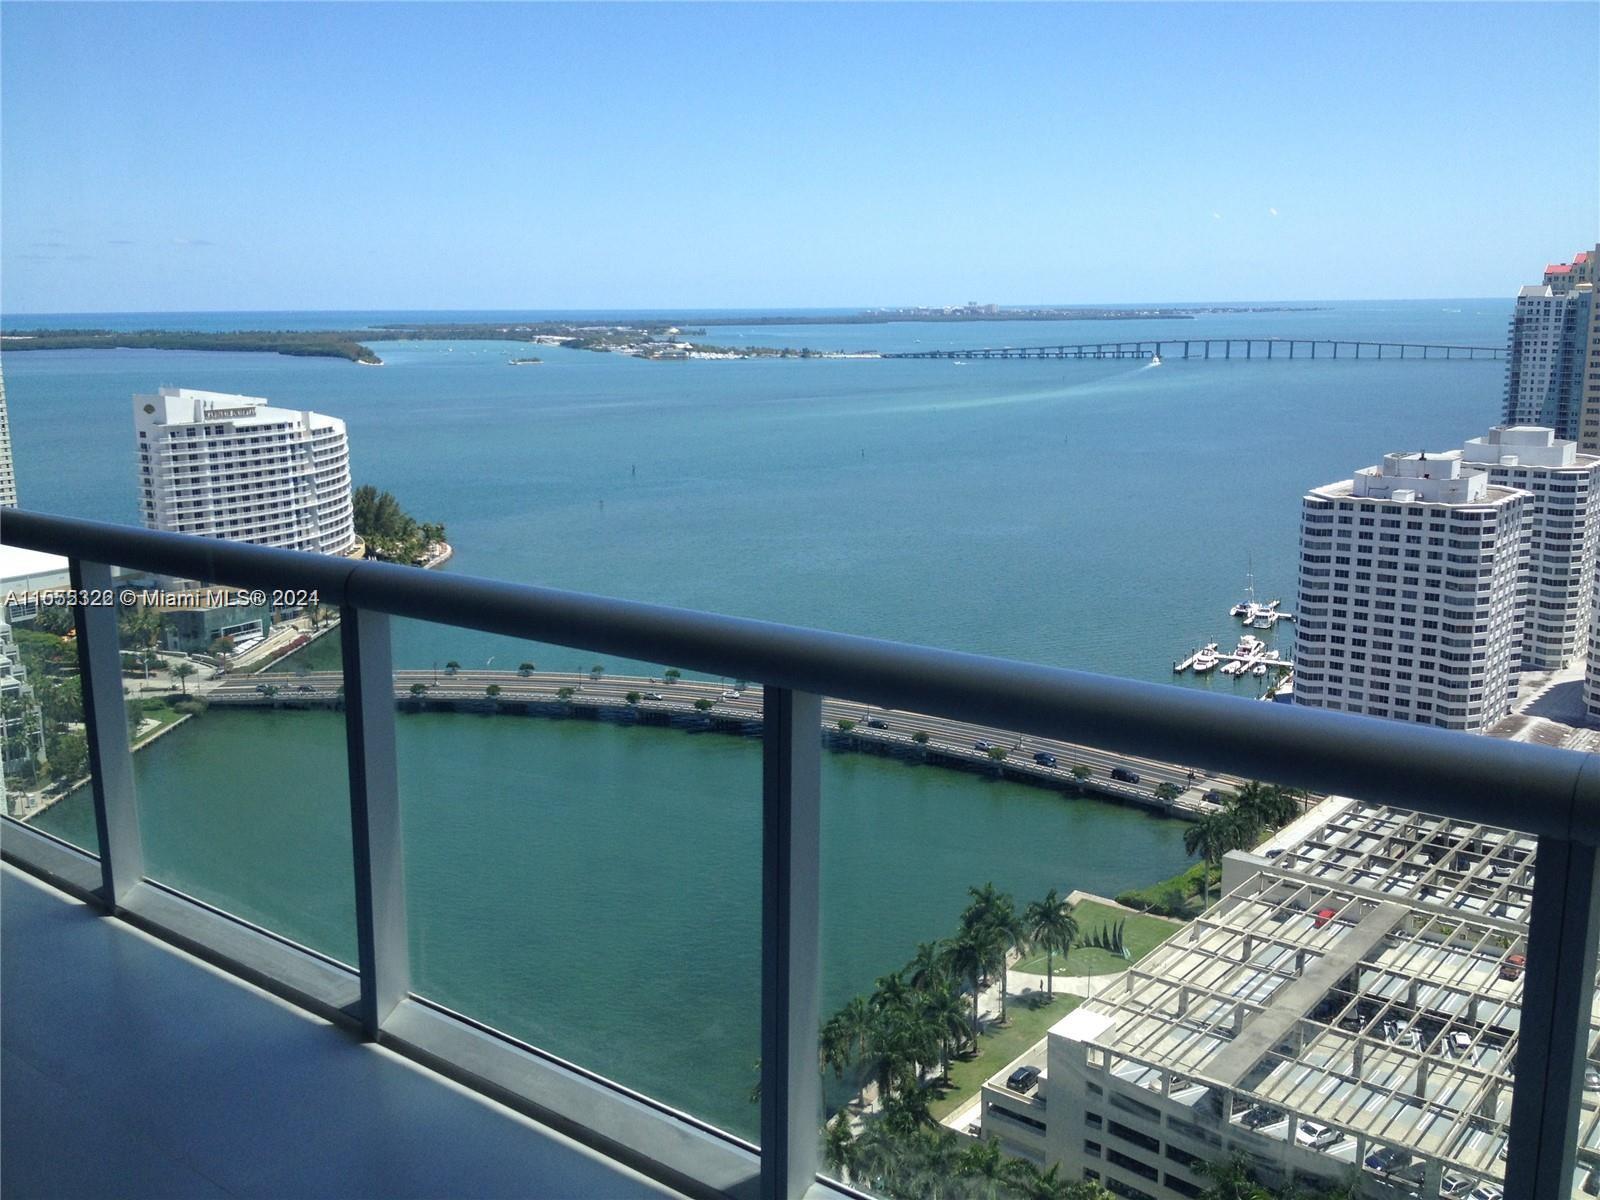 Breathtaking view of Biscayne Bay from one of the largest 1bedrooms at Icon Brickell. Great layout, marble floors throughout the unit and balcony, high-end appliances and open kitchen. Building has amazing amenities including the biggest pool area with huge infinity pool surrounded by cabanas, hot tubs, gym, yoga room, spinning room, , top quality restaurants and bars, luxurious full-service SPA, state-of-the-art fitness center, fitness and yoga classes and personal trainer available, movie theater, billiard room, 24-7 concierge, valet parking, and more. This building is located in the heart of Brickell and walking distance to many famous restaurants and Brickell City Center mall.